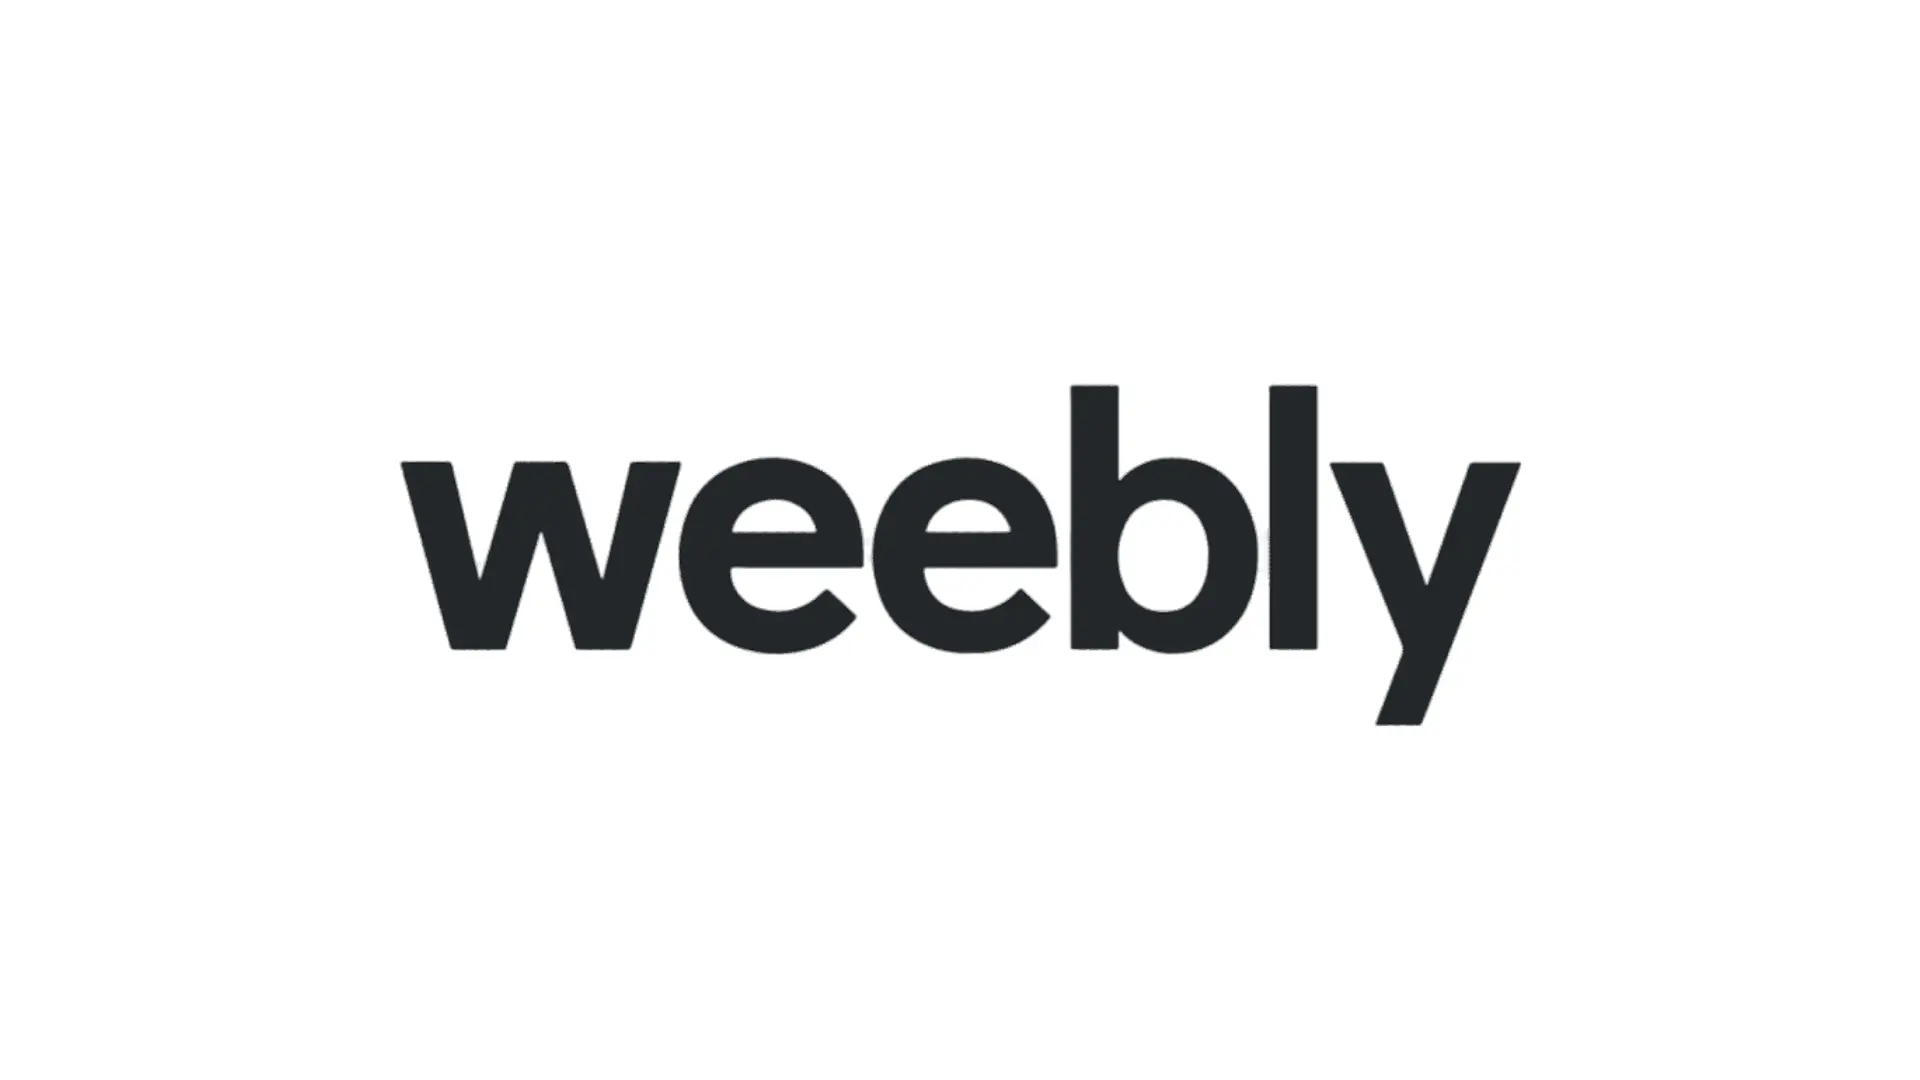 Weebly brand